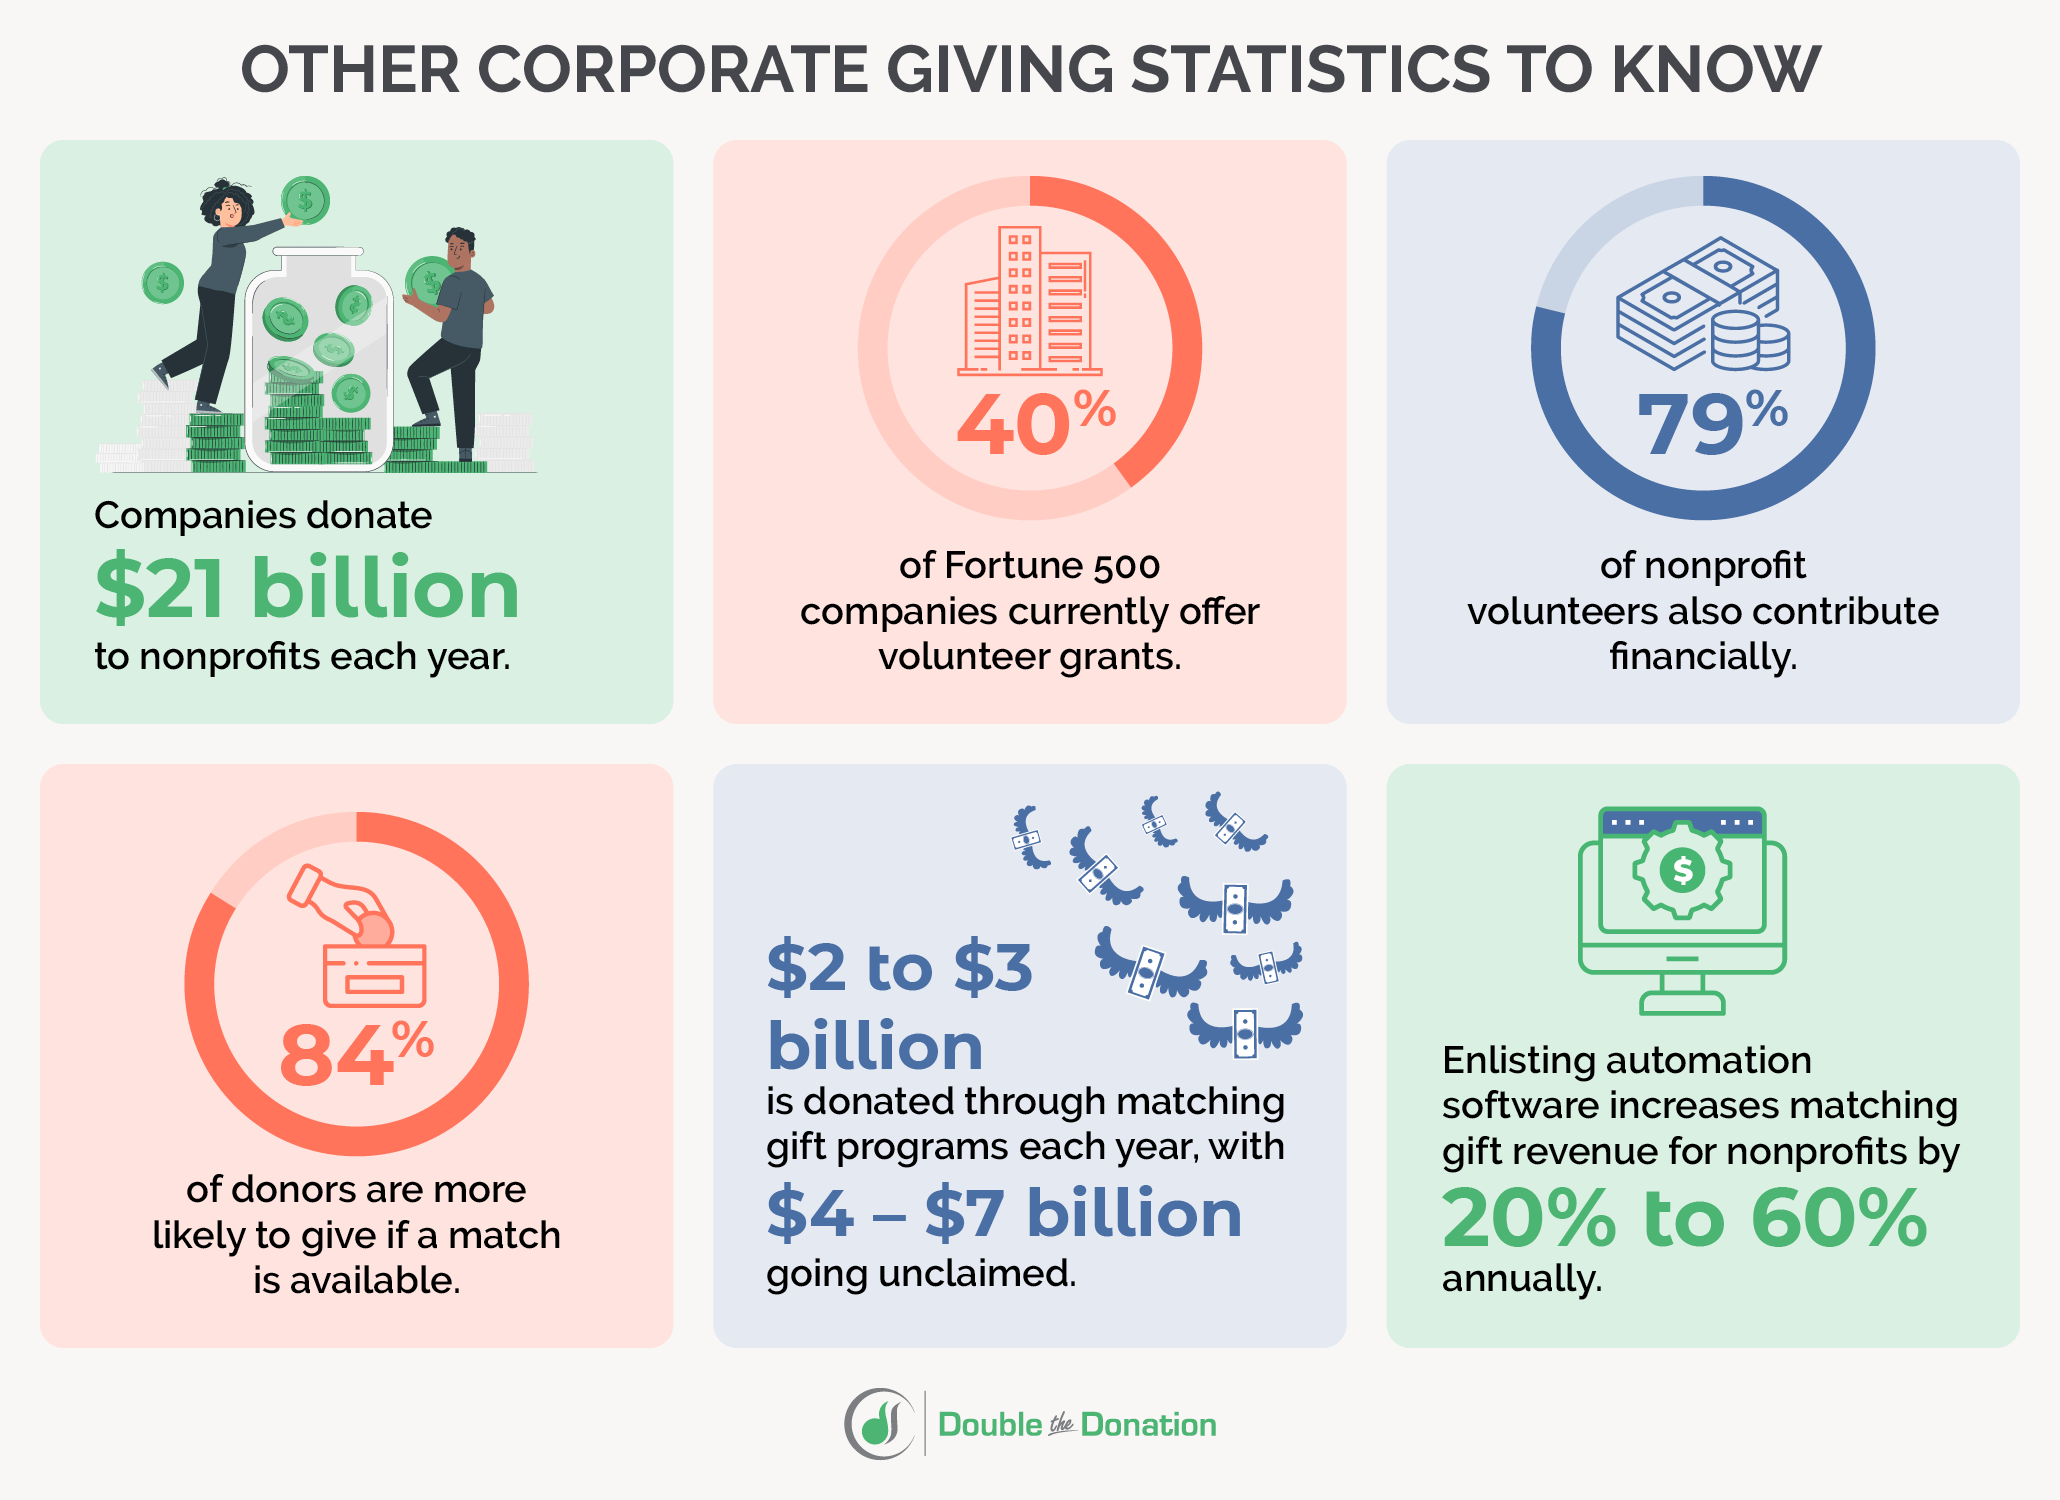 Volunteer time off and other corporate giving statistics